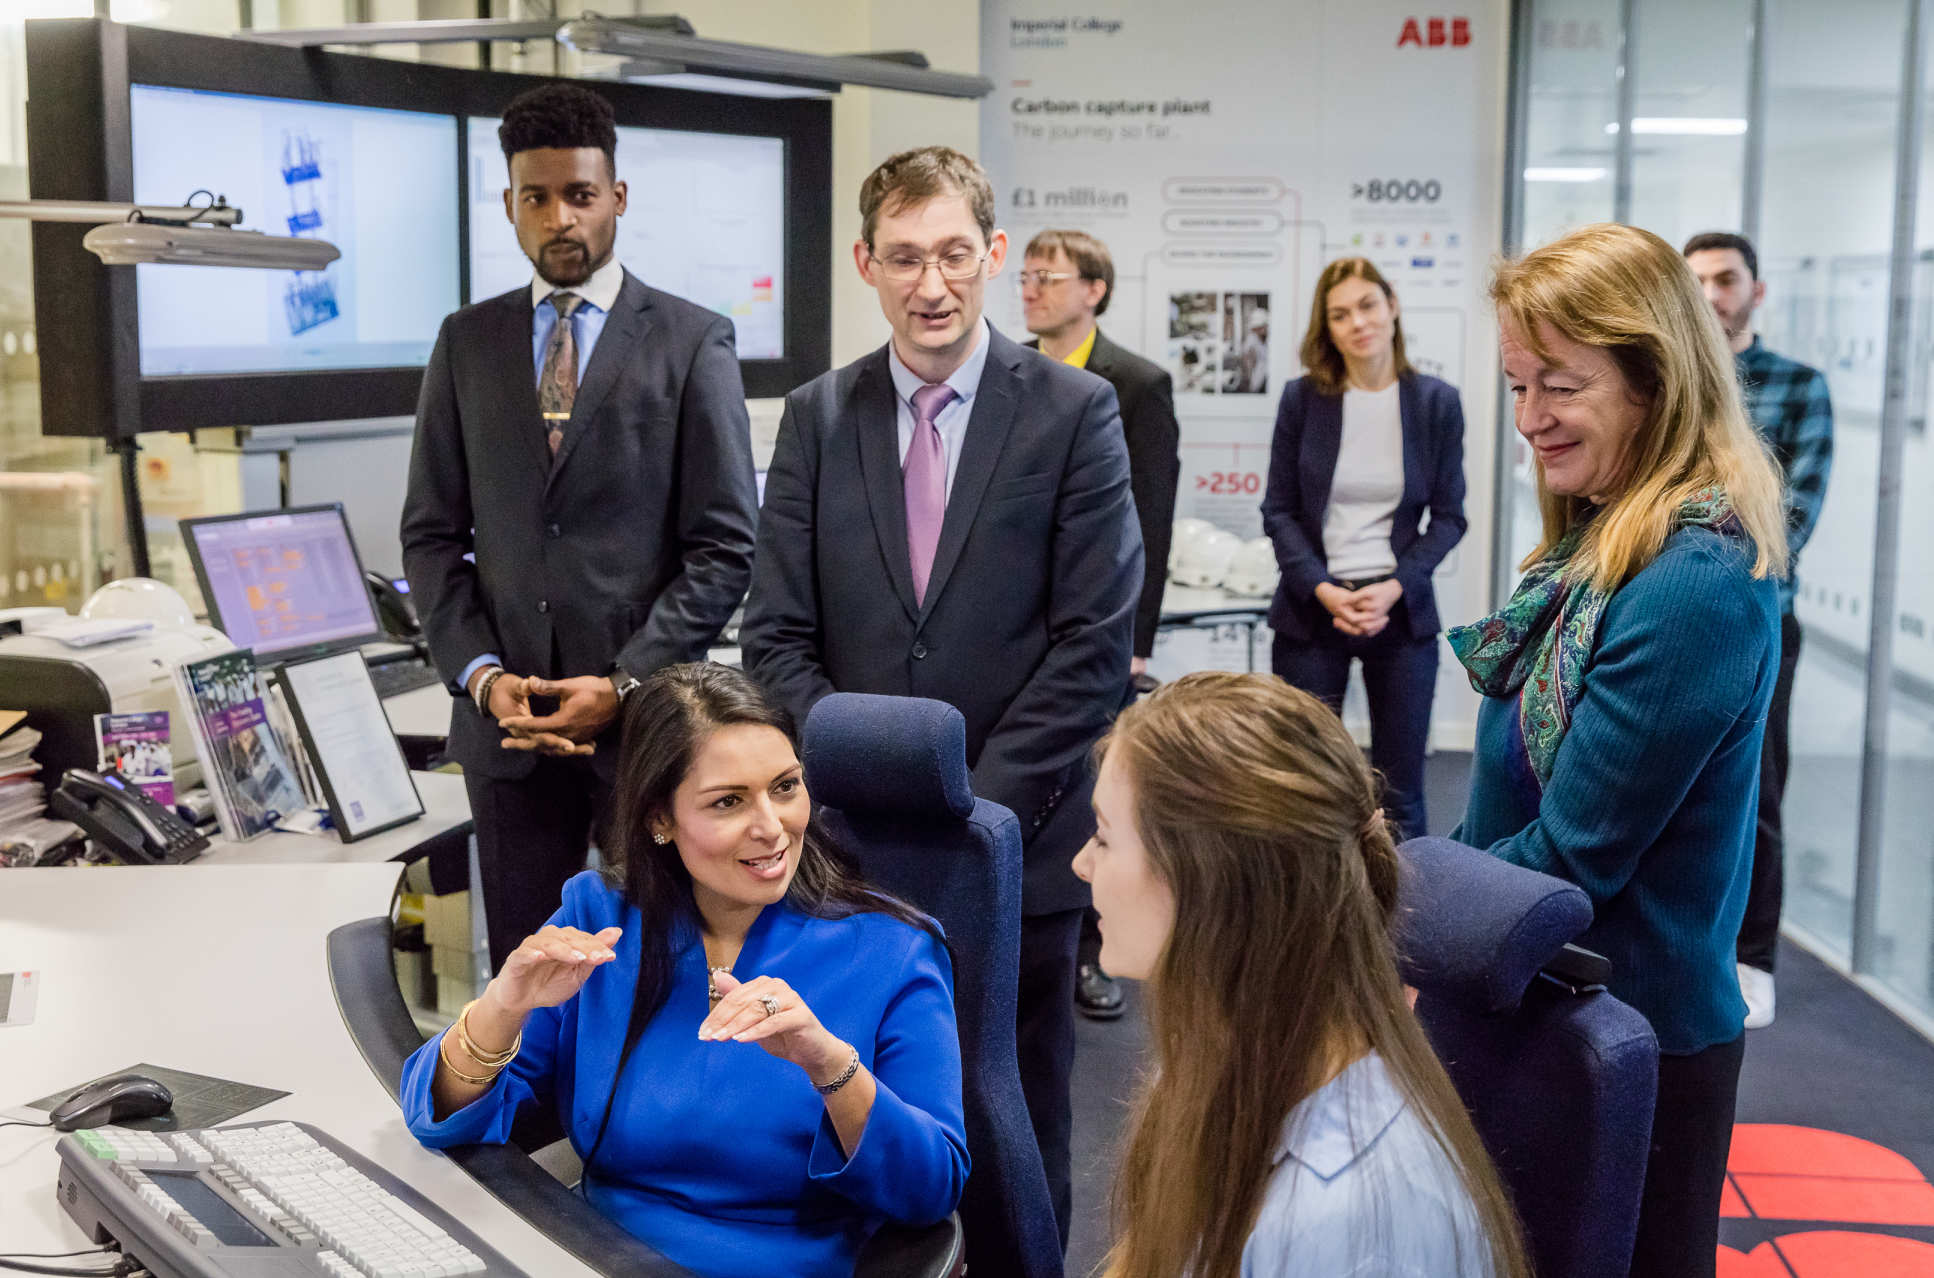 Home Secretary Priti Patel, President Alice Gast and researchers and students in the Carbon Capture Pilot Plant